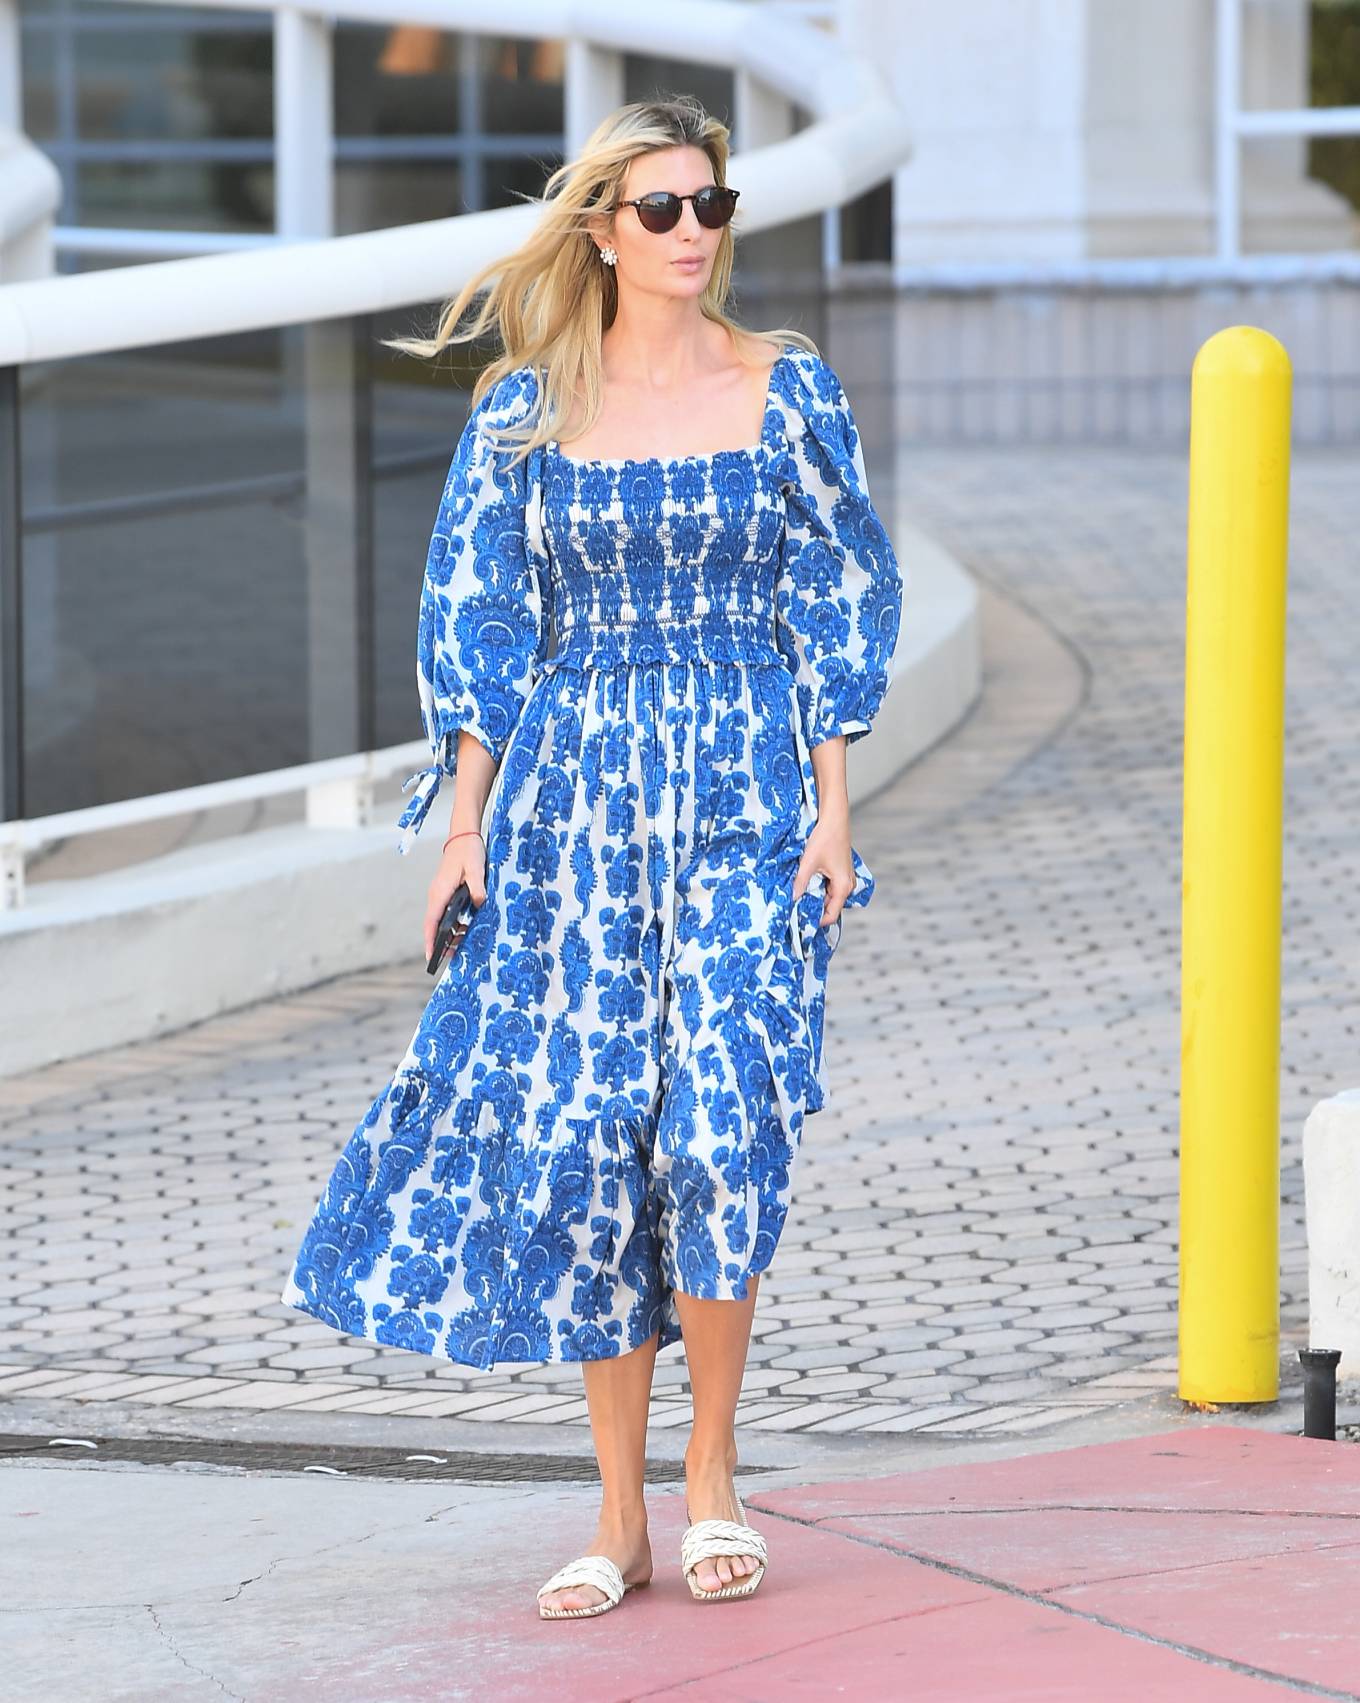 Ivanka Trump - Seen in a summery blue dress while out in Miami